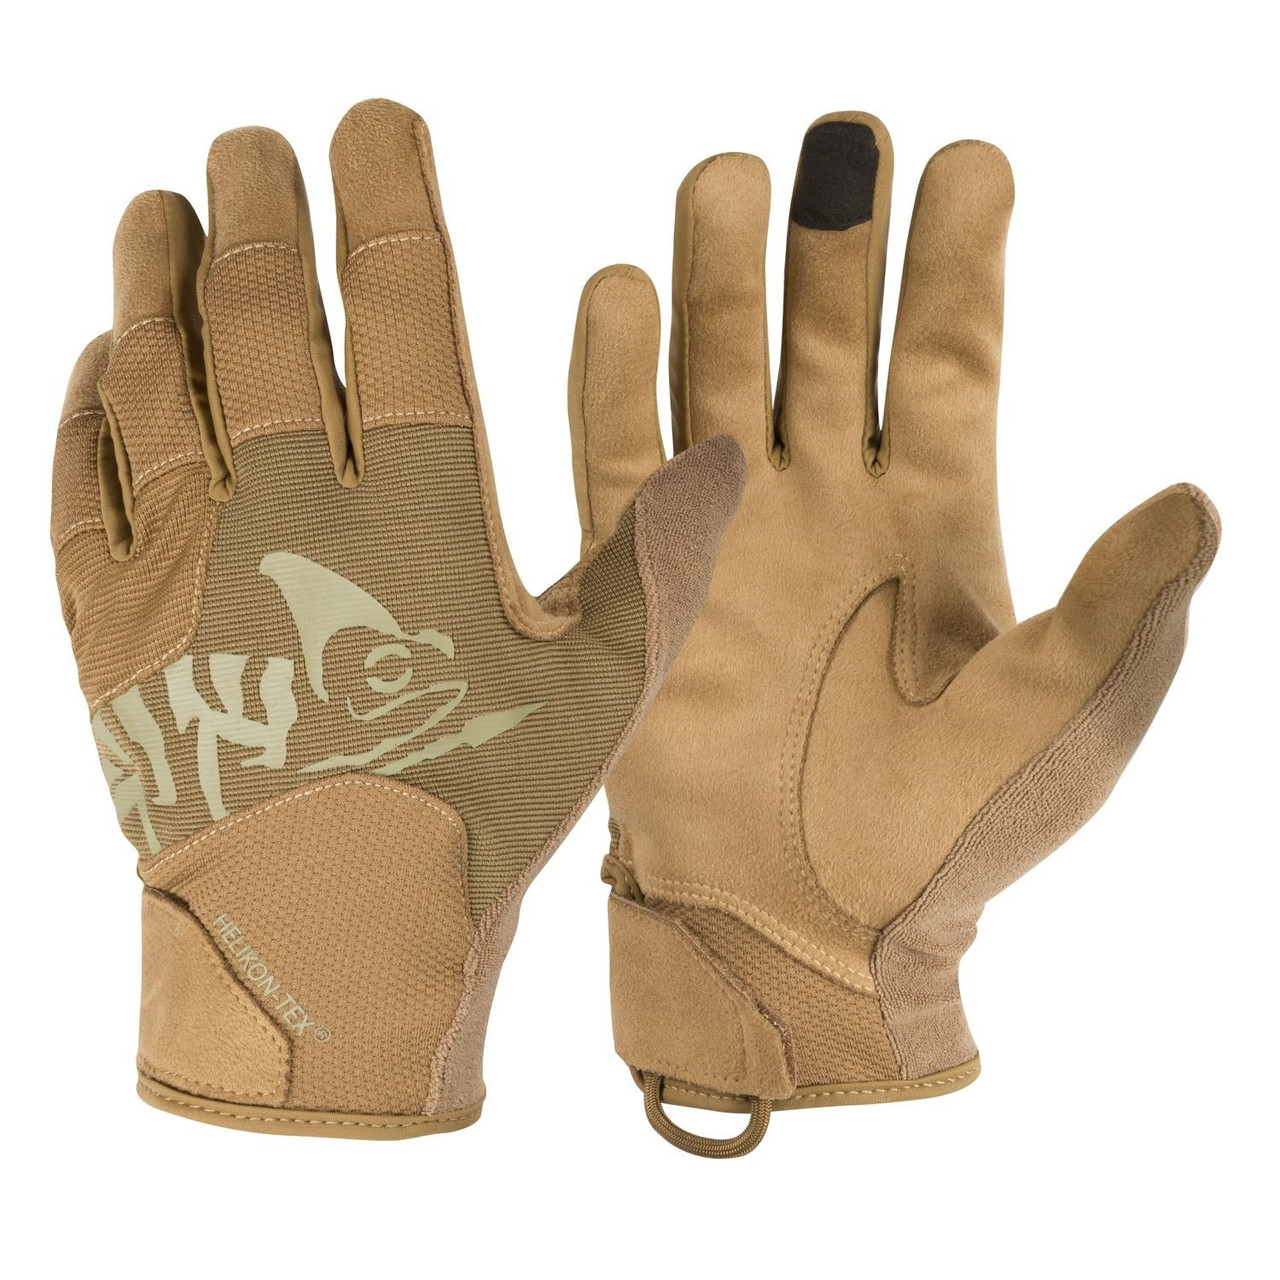 "Precision and Comfort: Перчатки полнопалые Helikon-Tex All Round Tactical Gloves, Цвет - Coyote, Размер XL" - фото 1 - id-p2012468491